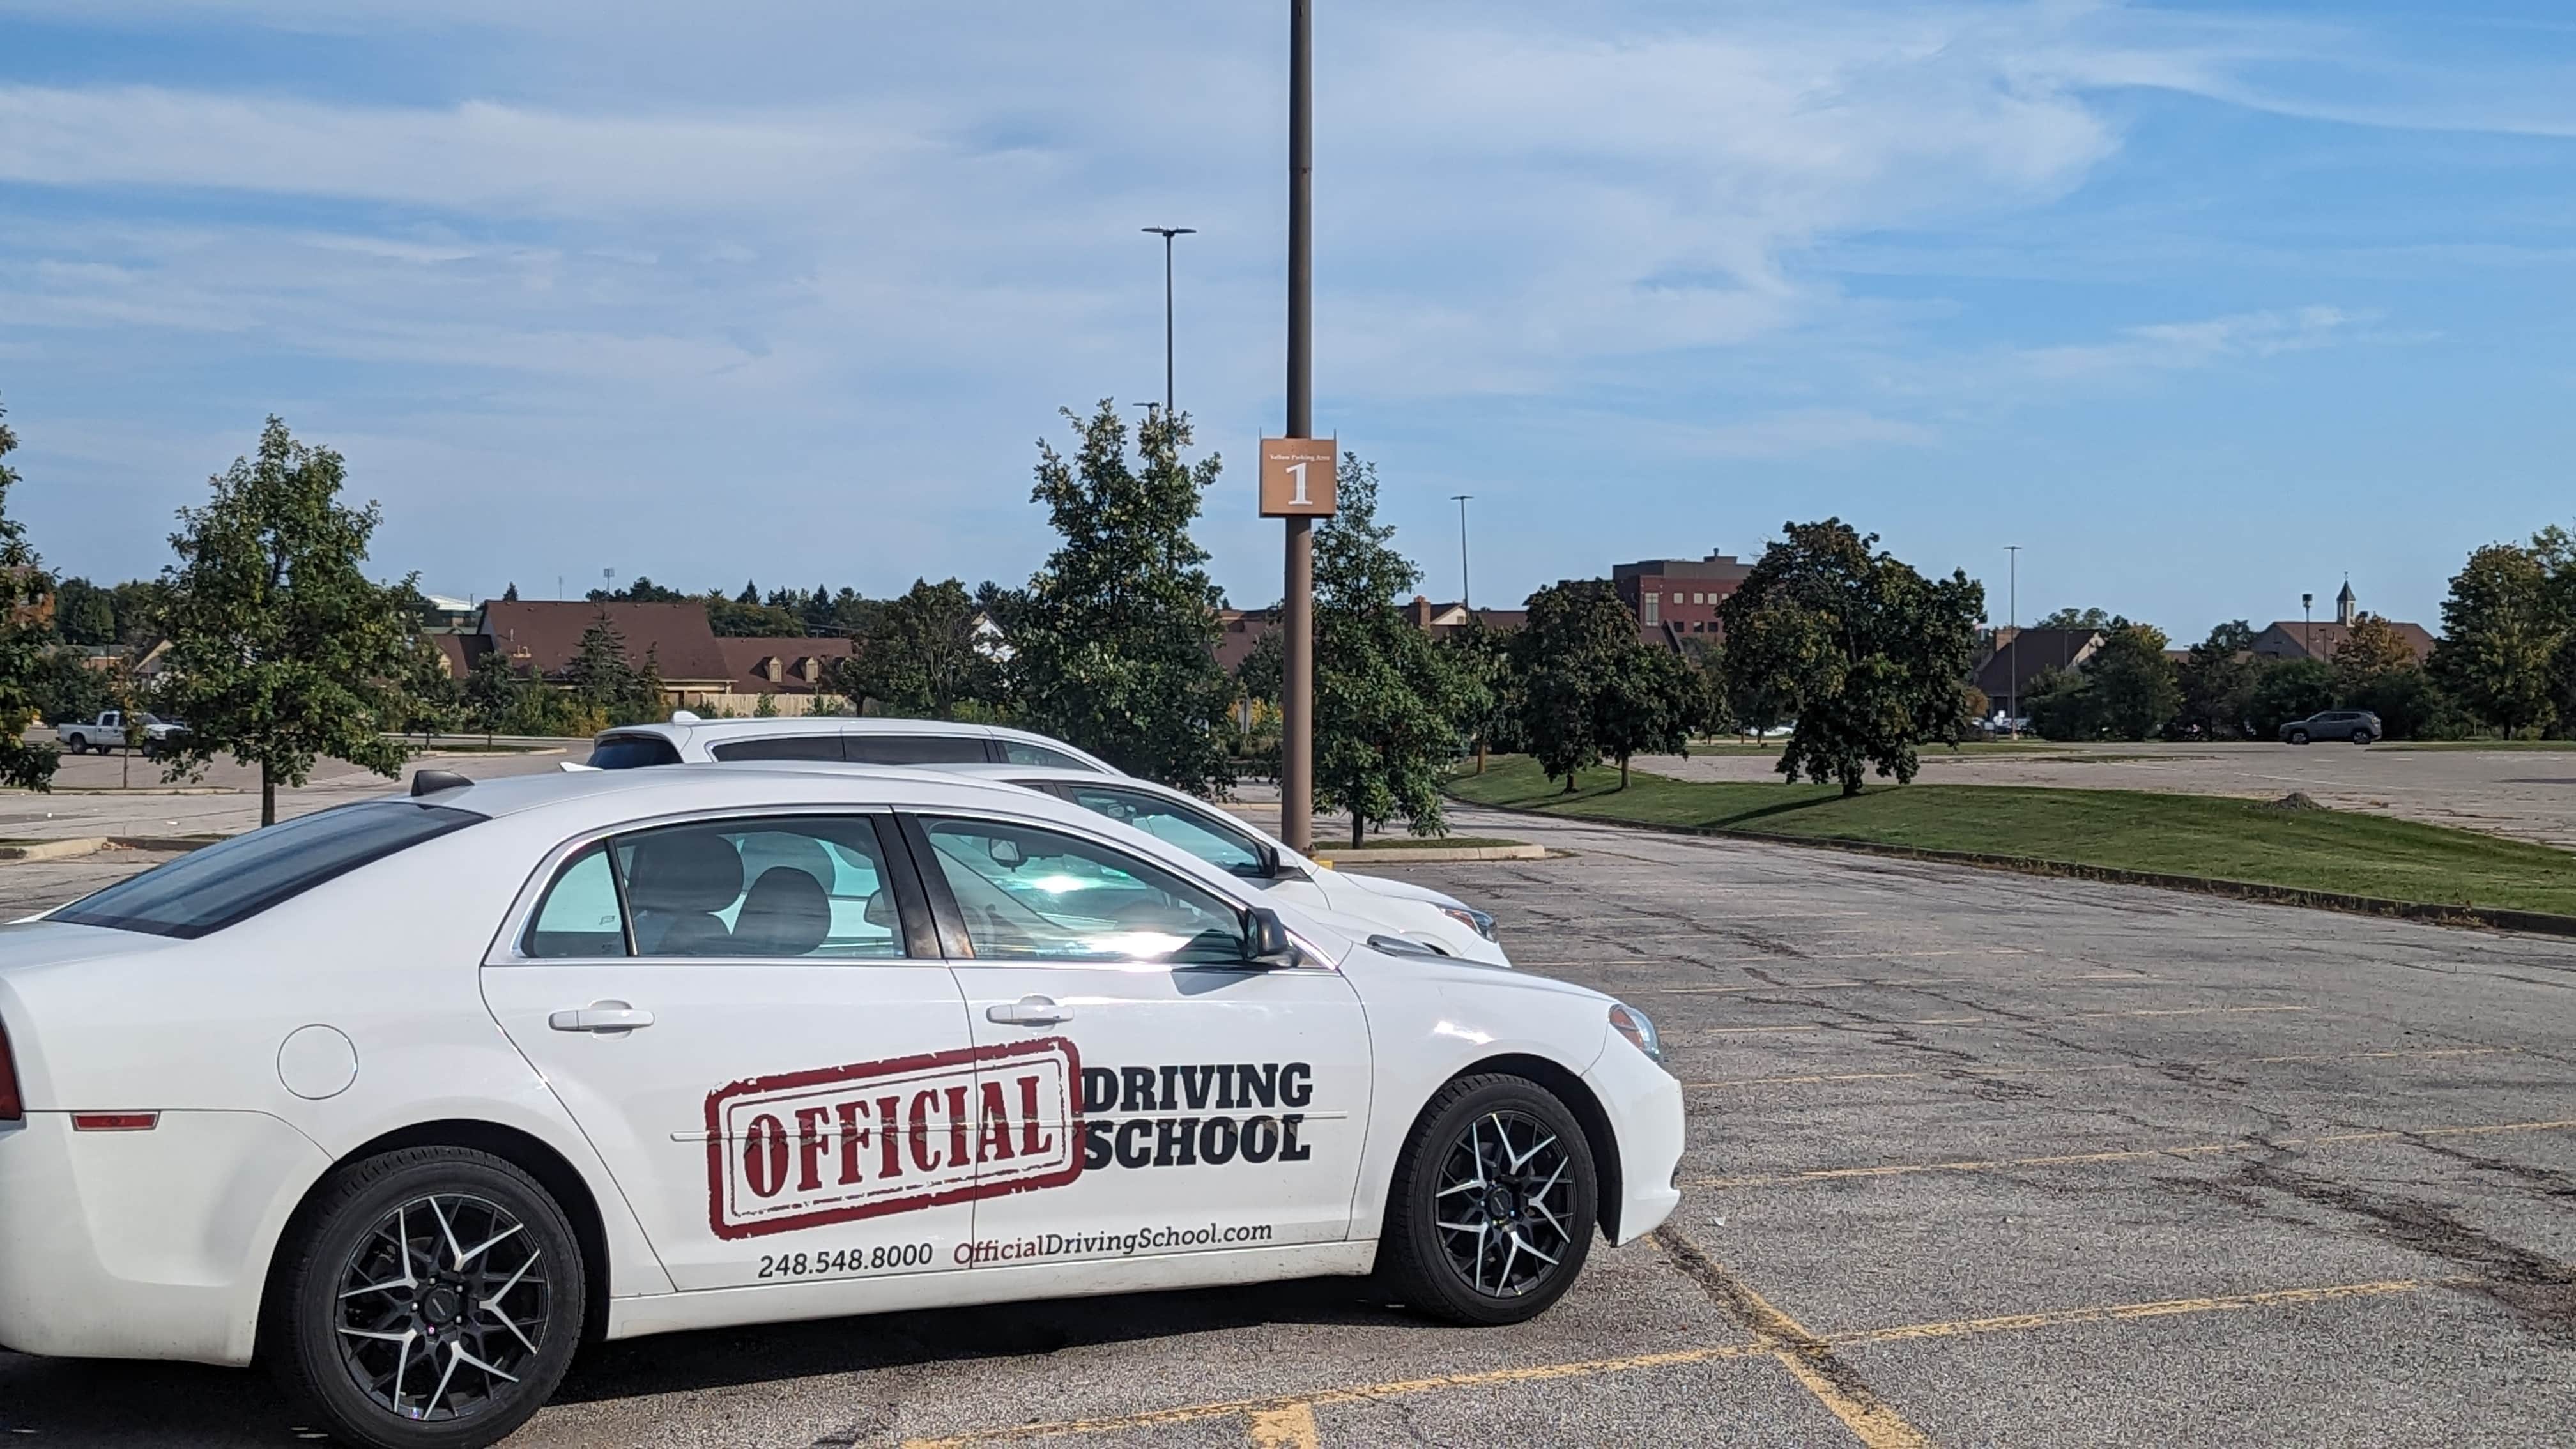 Official Driving School Ann Arbor MI 48108, US, driving lessons near me